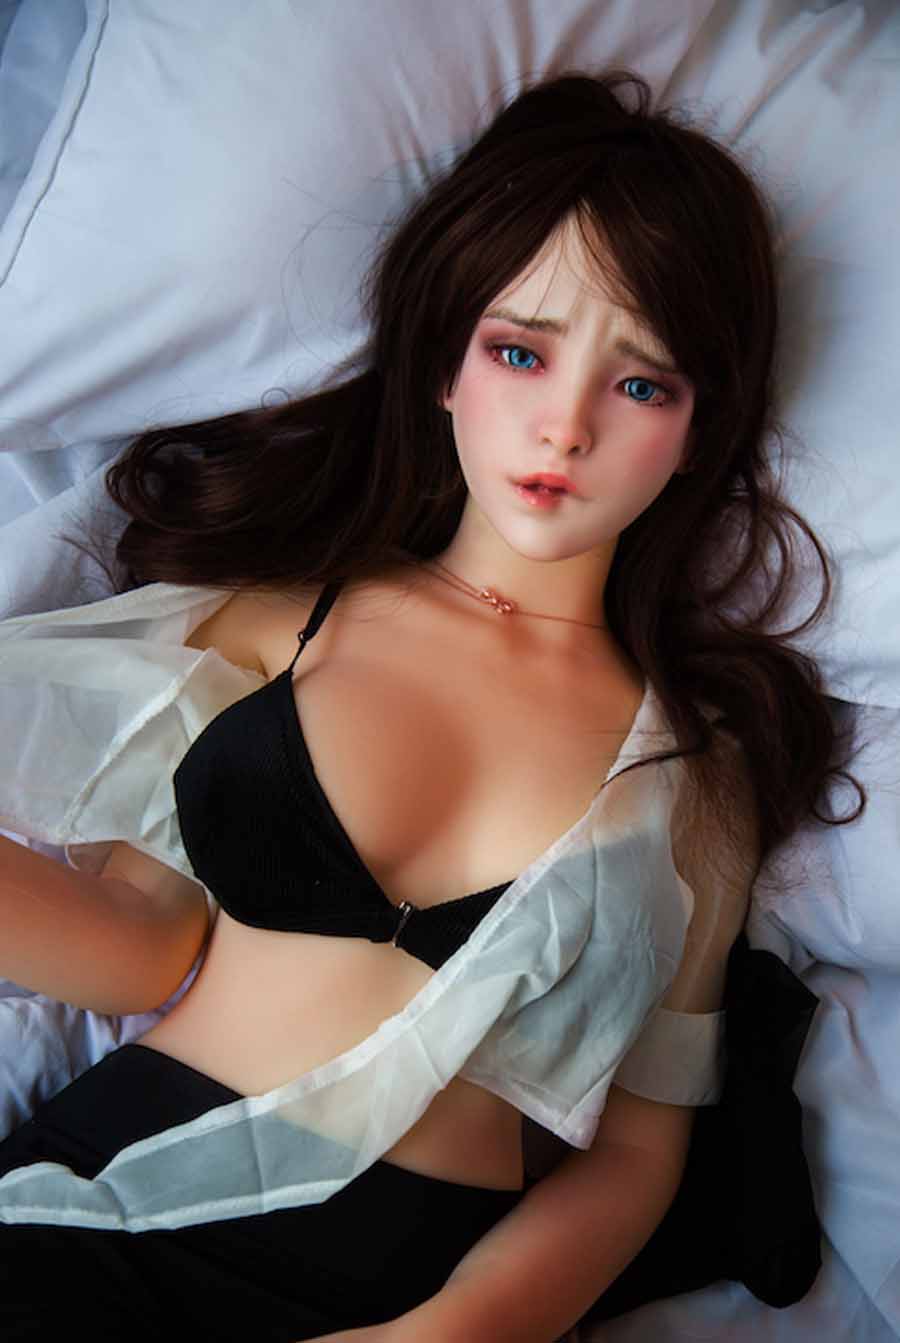 Real dolls for sex in Nanchang